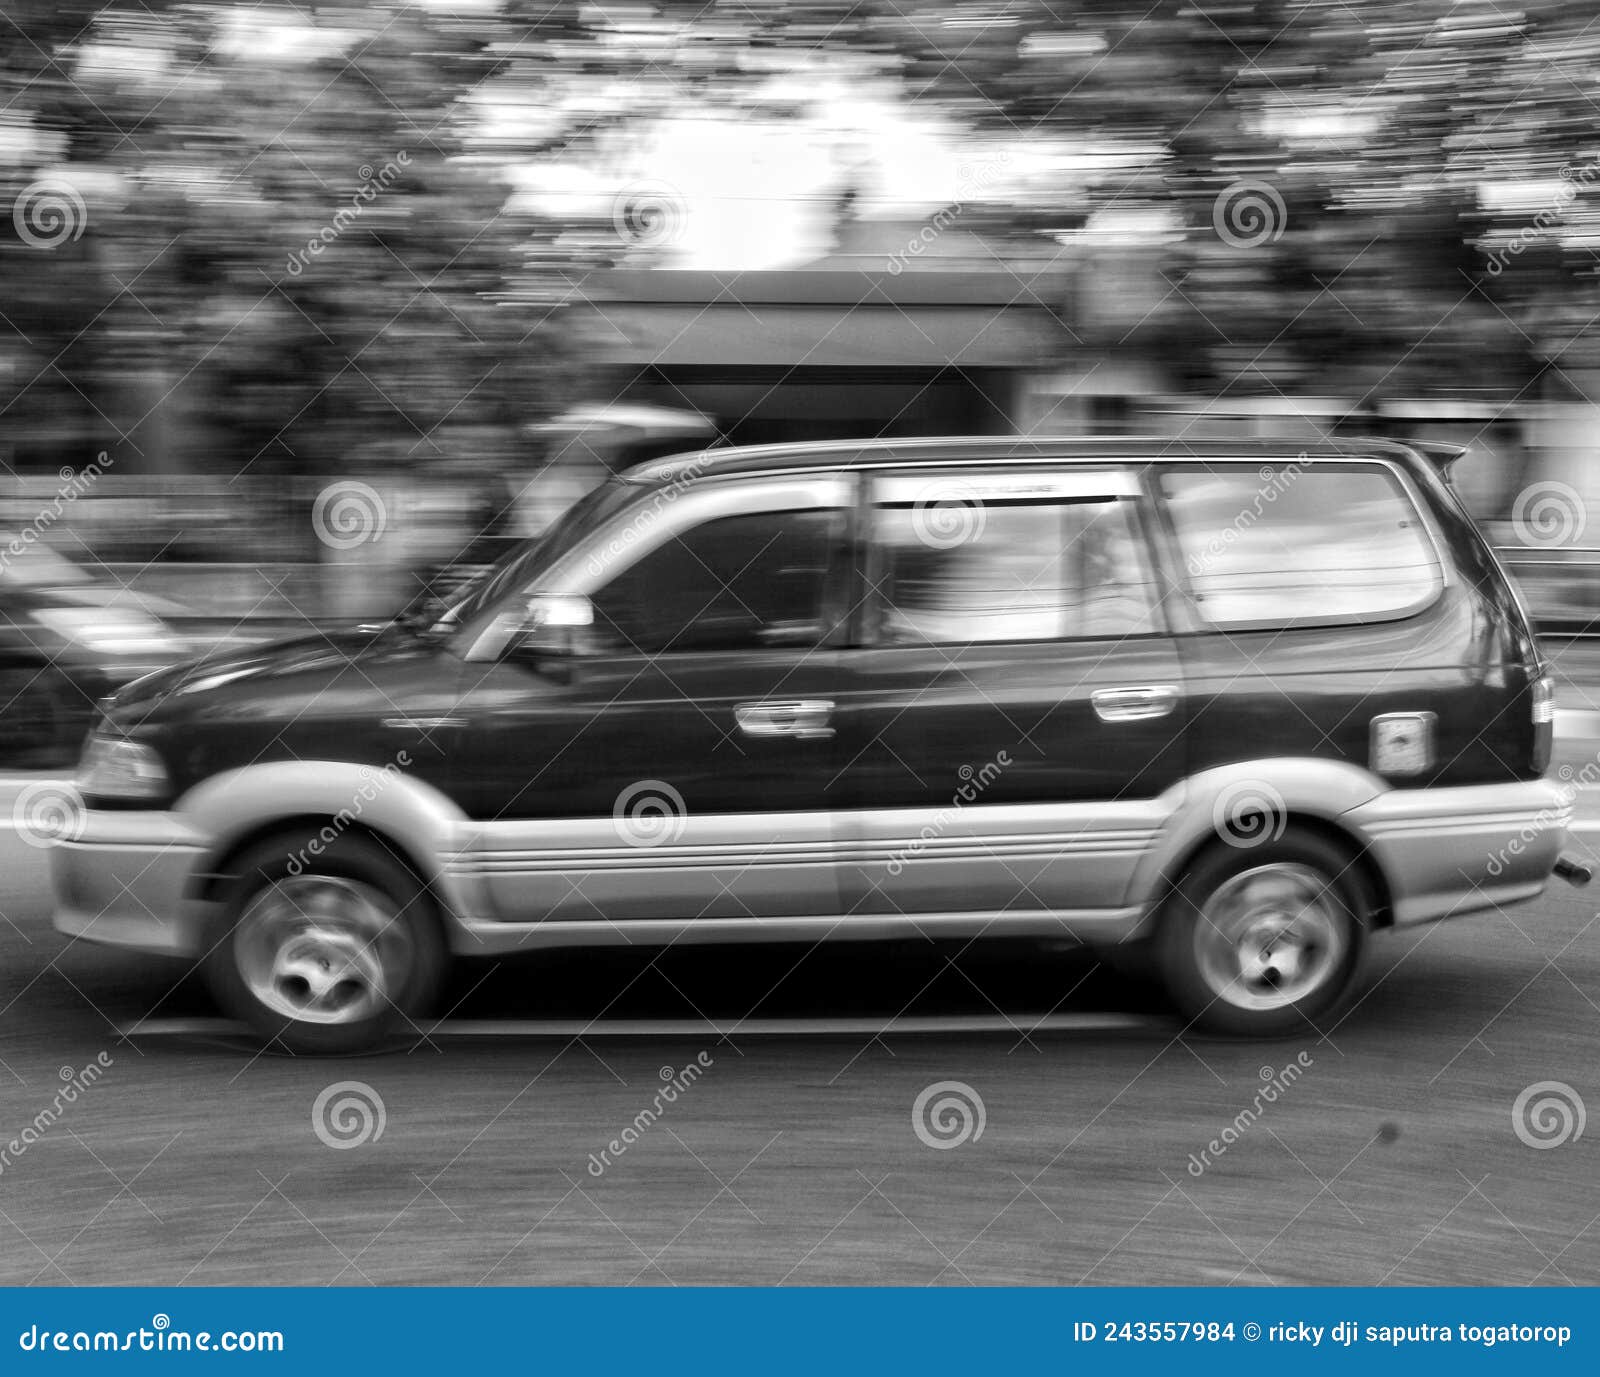 A Car in Indonesia in Black and White Stock Photo - Image of indonesia